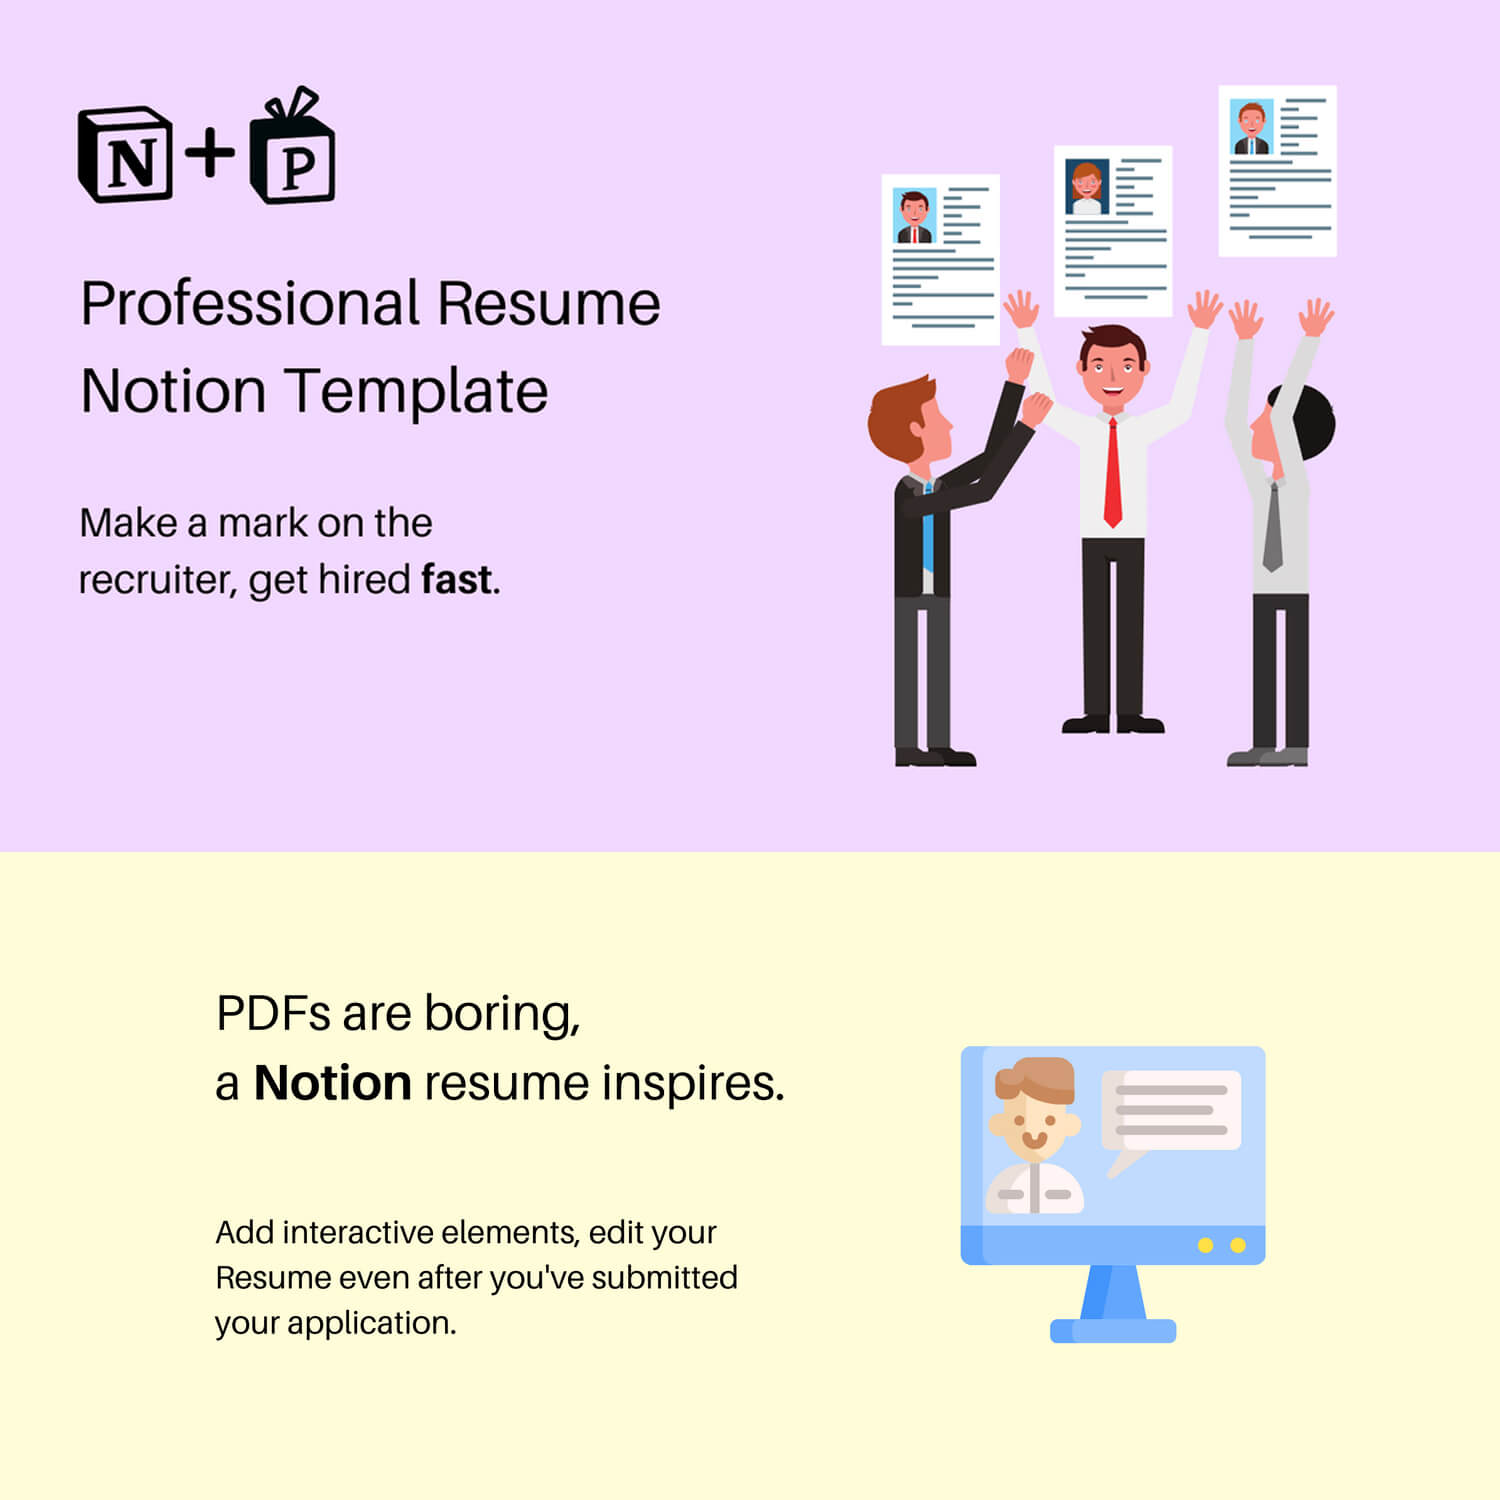 Notion professional resume template.